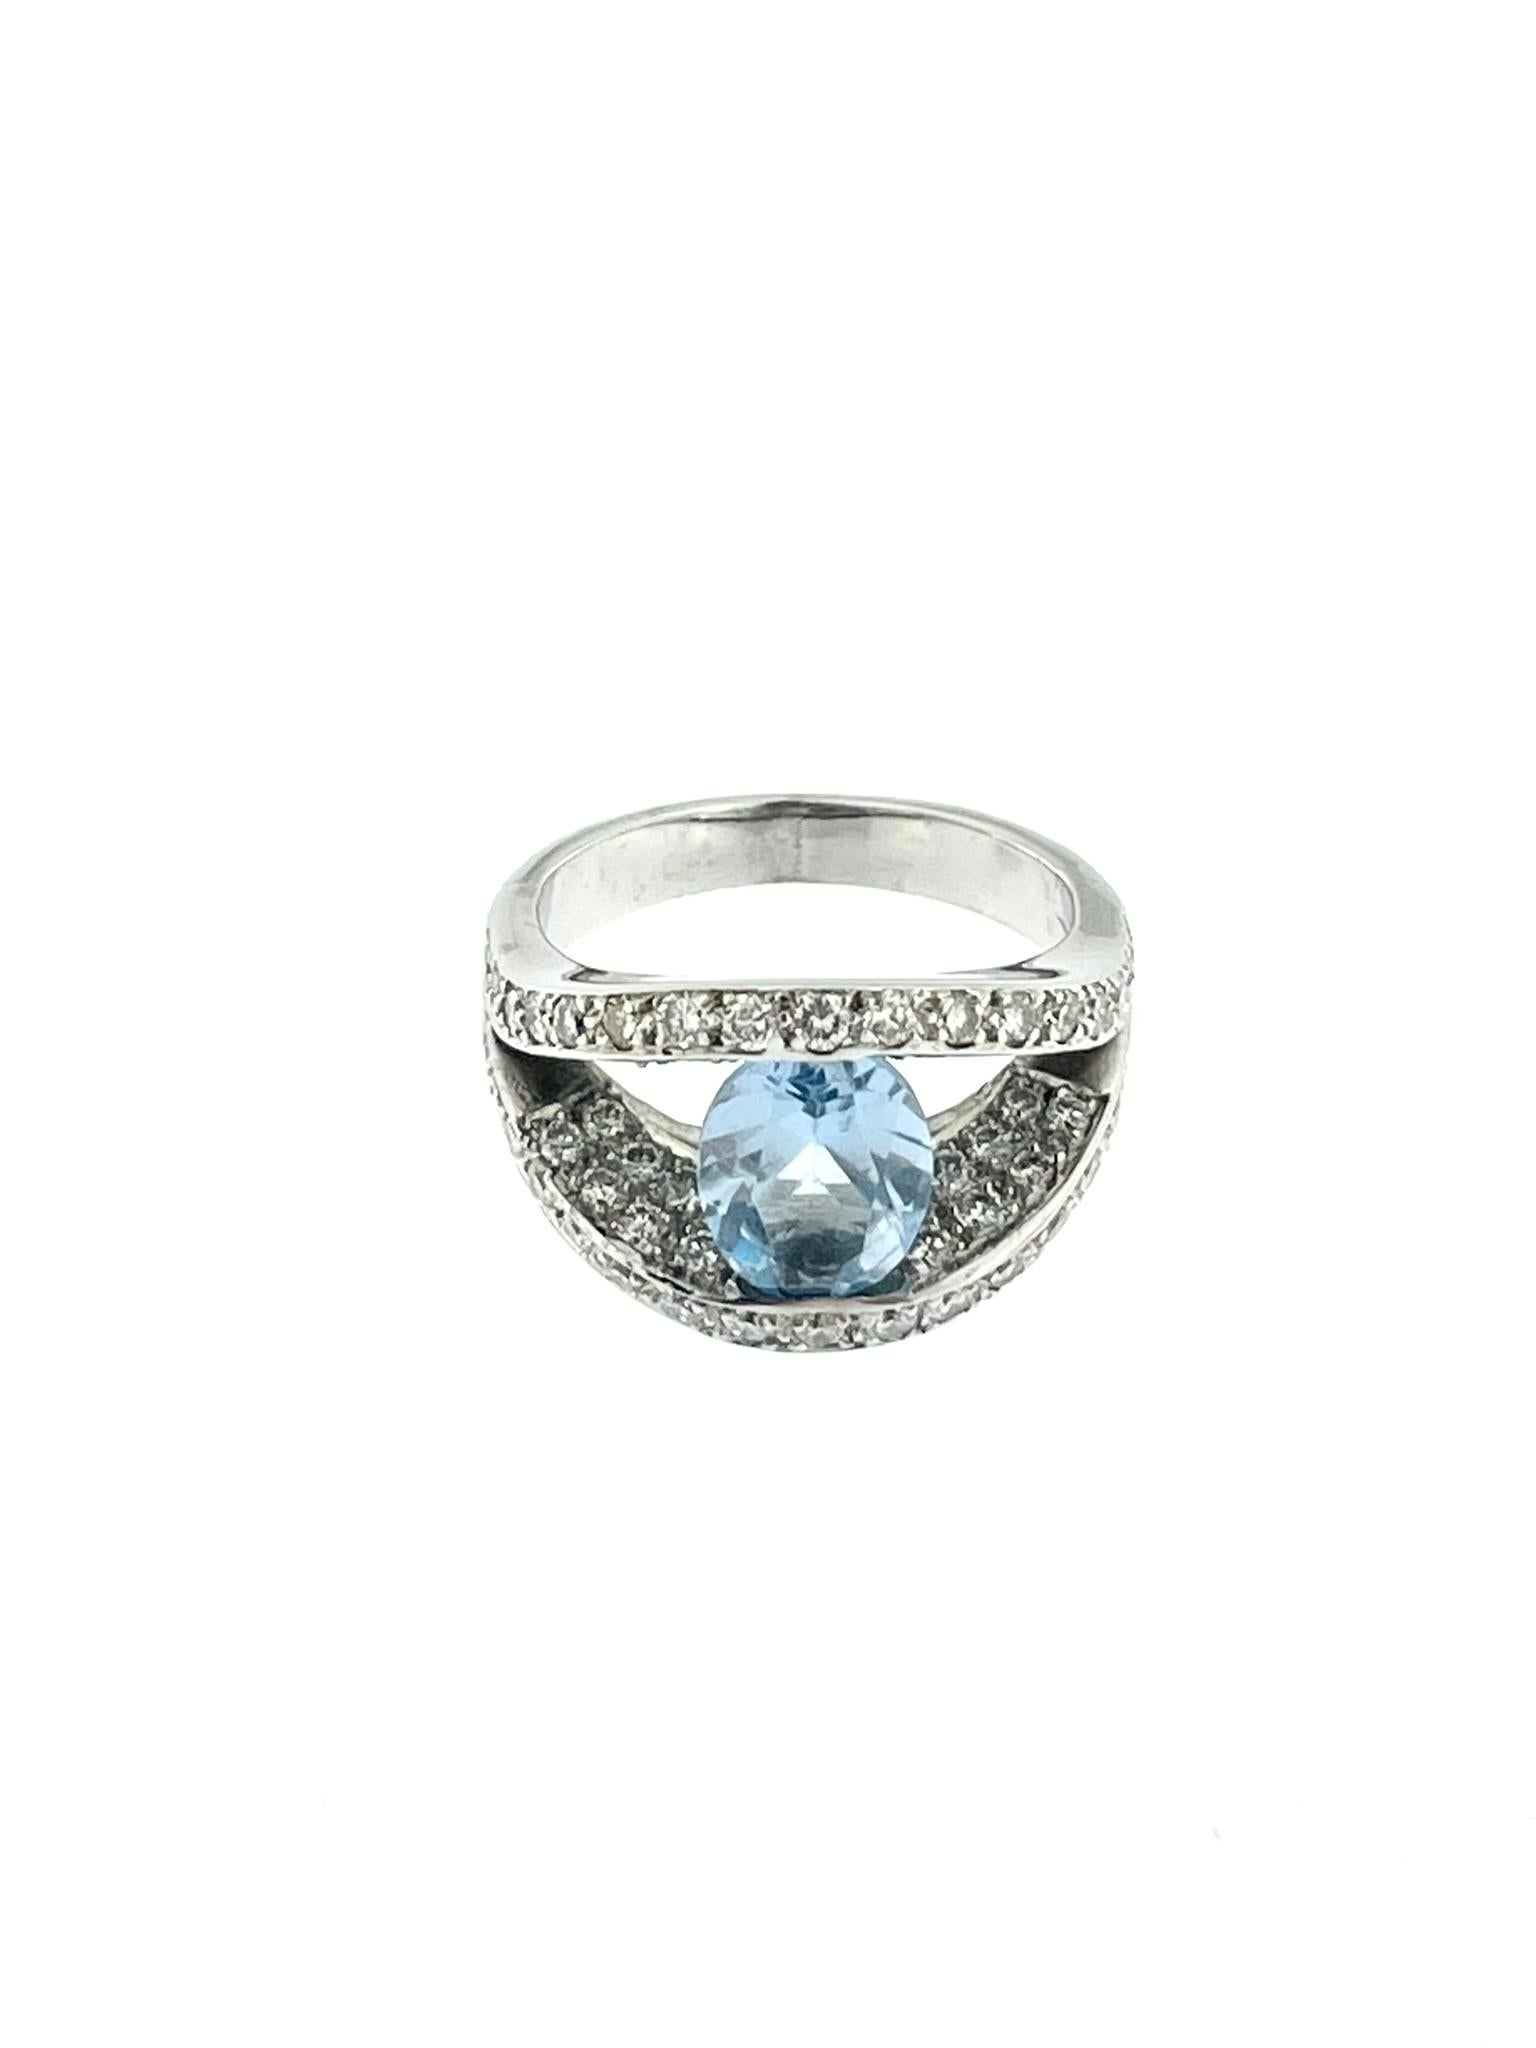 Modern French White Gold Ring with Diamonds and Aquamarine In Good Condition For Sale In Esch-Sur-Alzette, LU